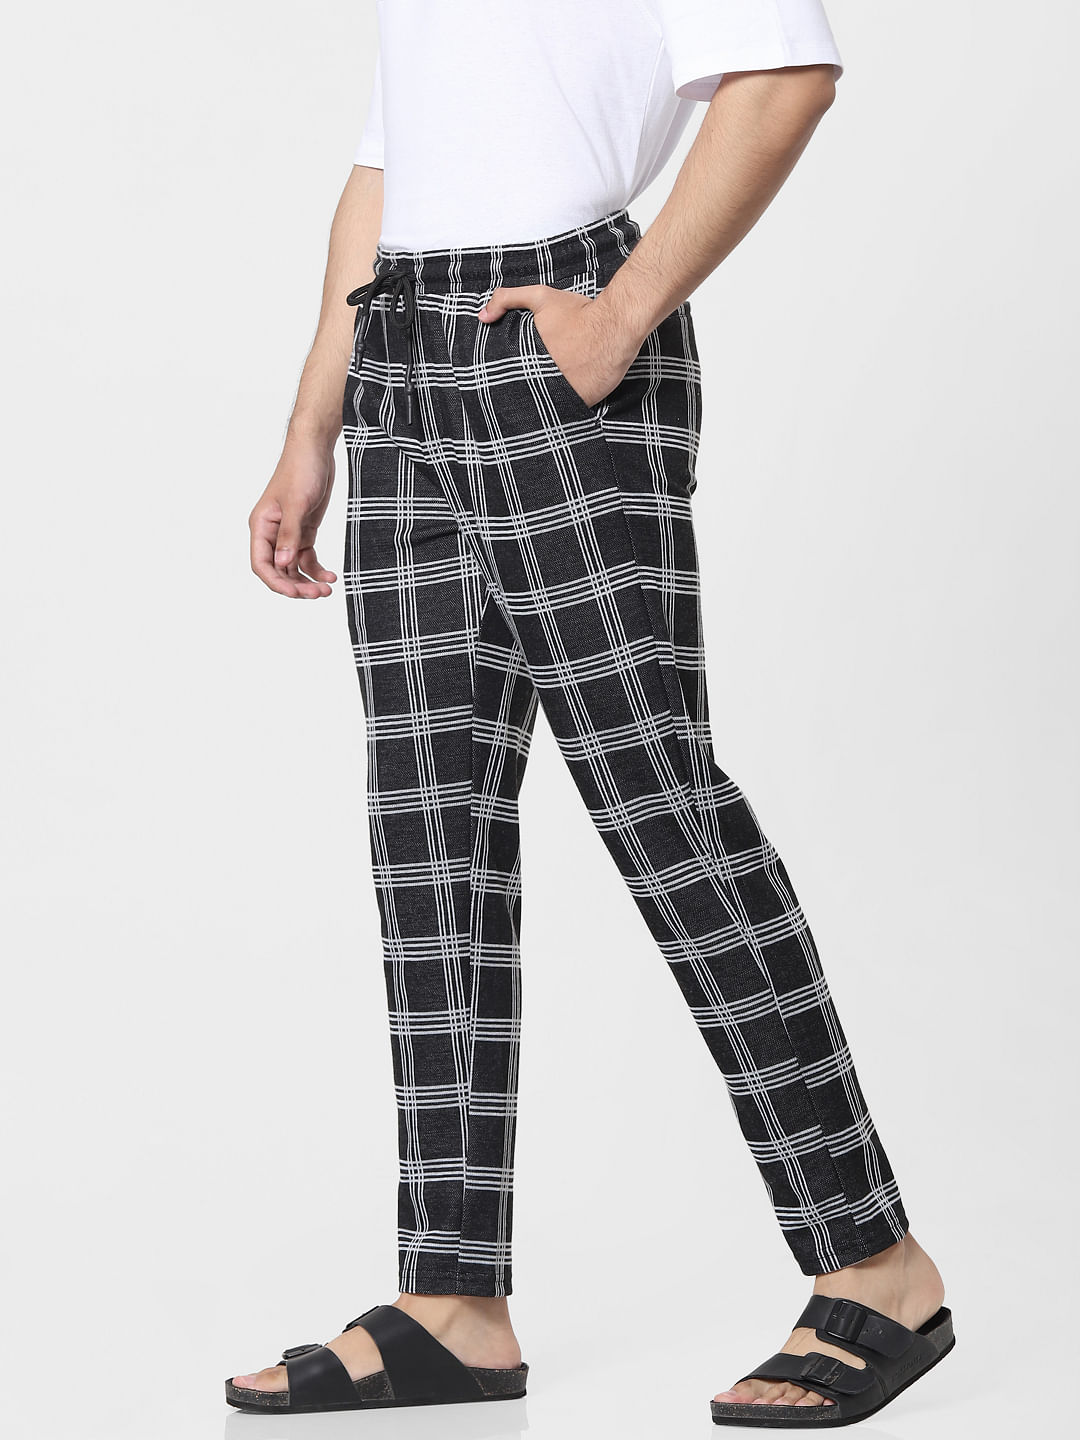 Mens Checkered Pants Outfits  How to Wear and When  Berle